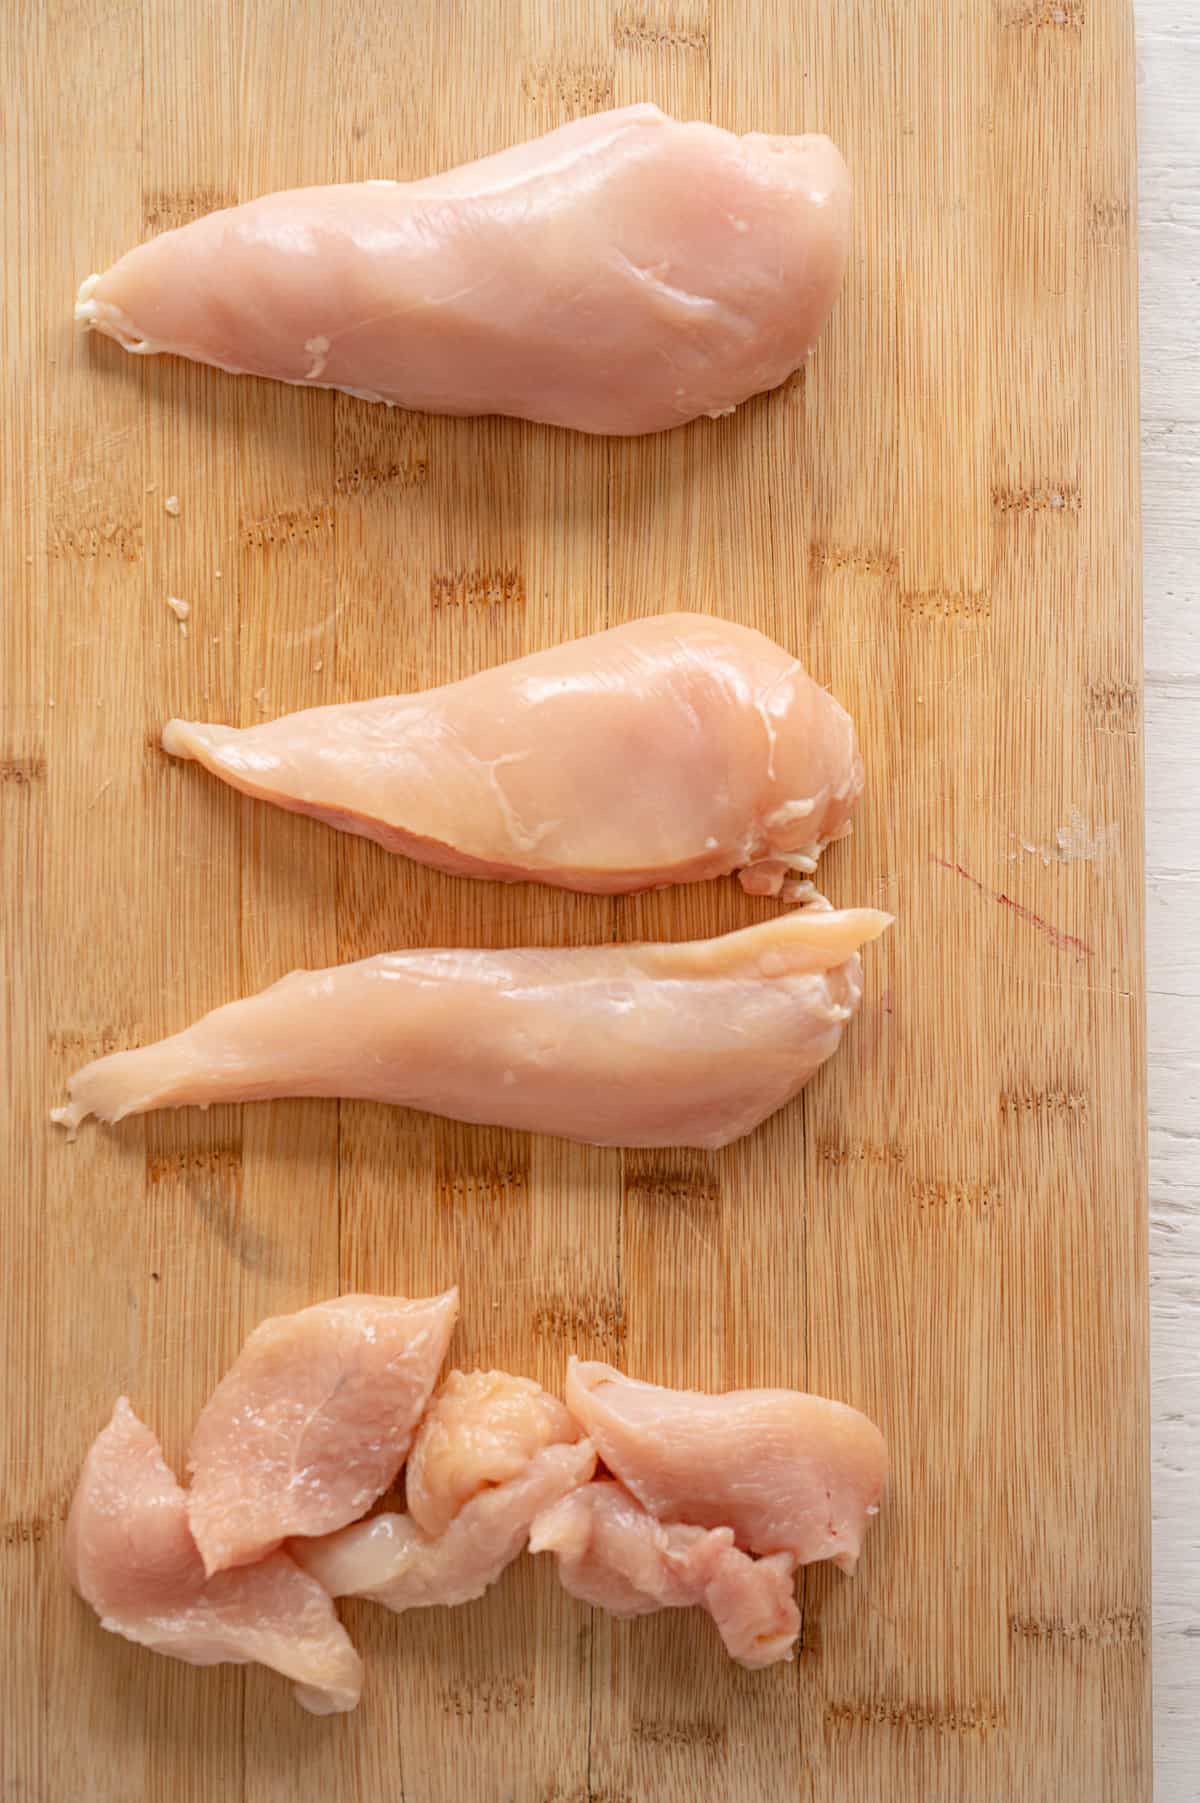 Cut up chicken breasts on cutting board.